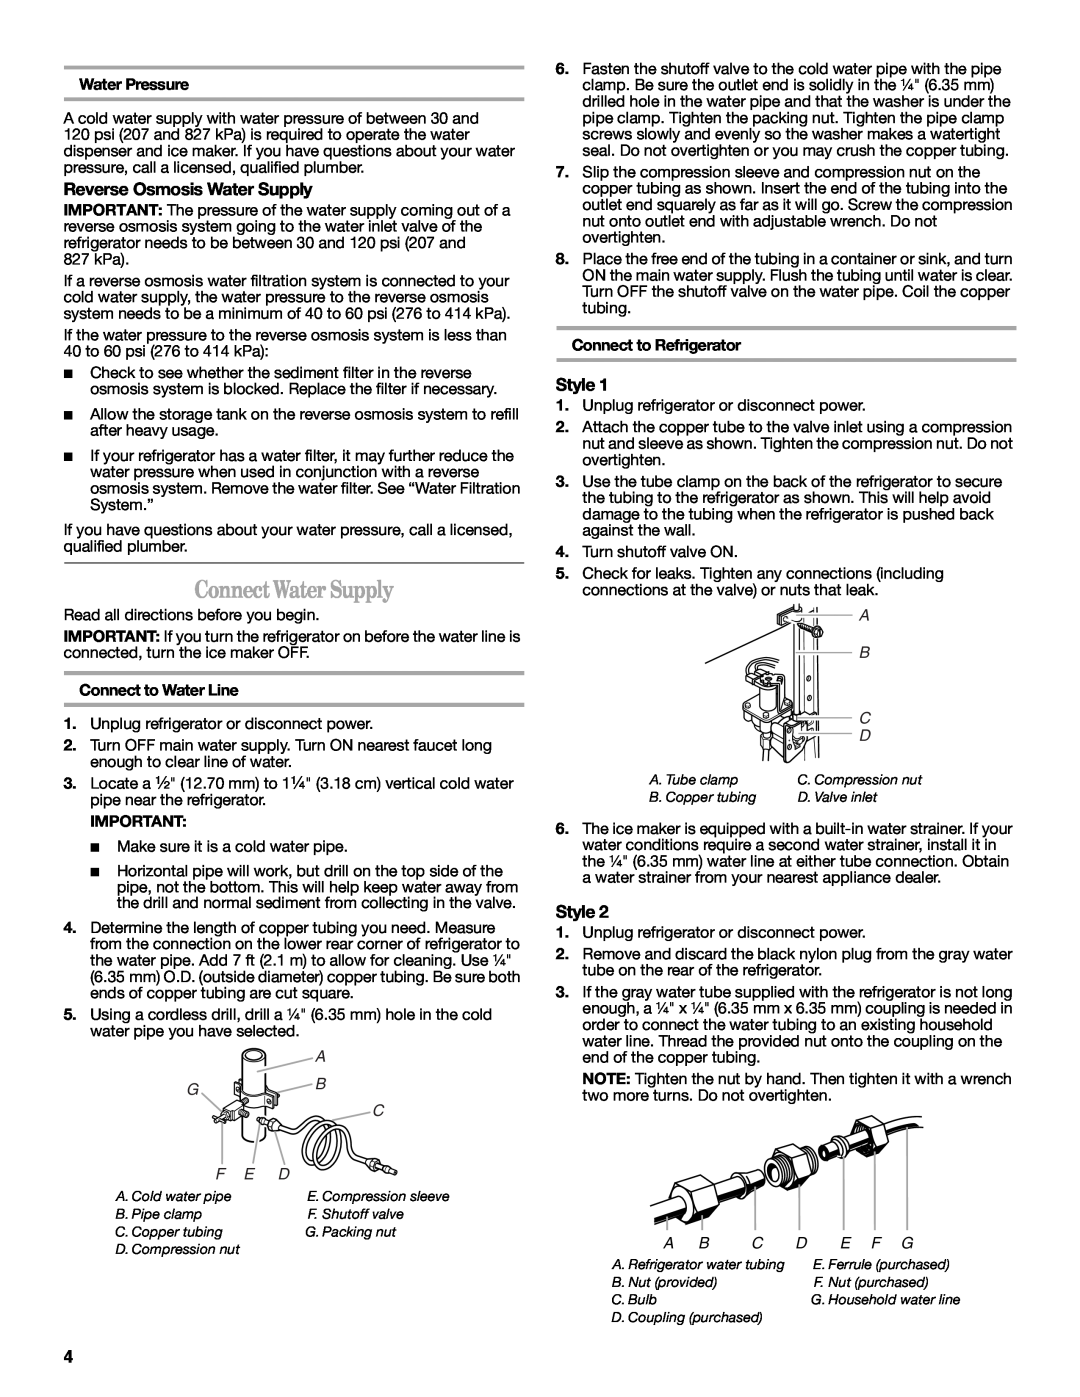 Whirlpool W10162450A, W10162451A installation instructions Connect Water Supply, Reverse Osmosis Water Supply, Style, E F G 